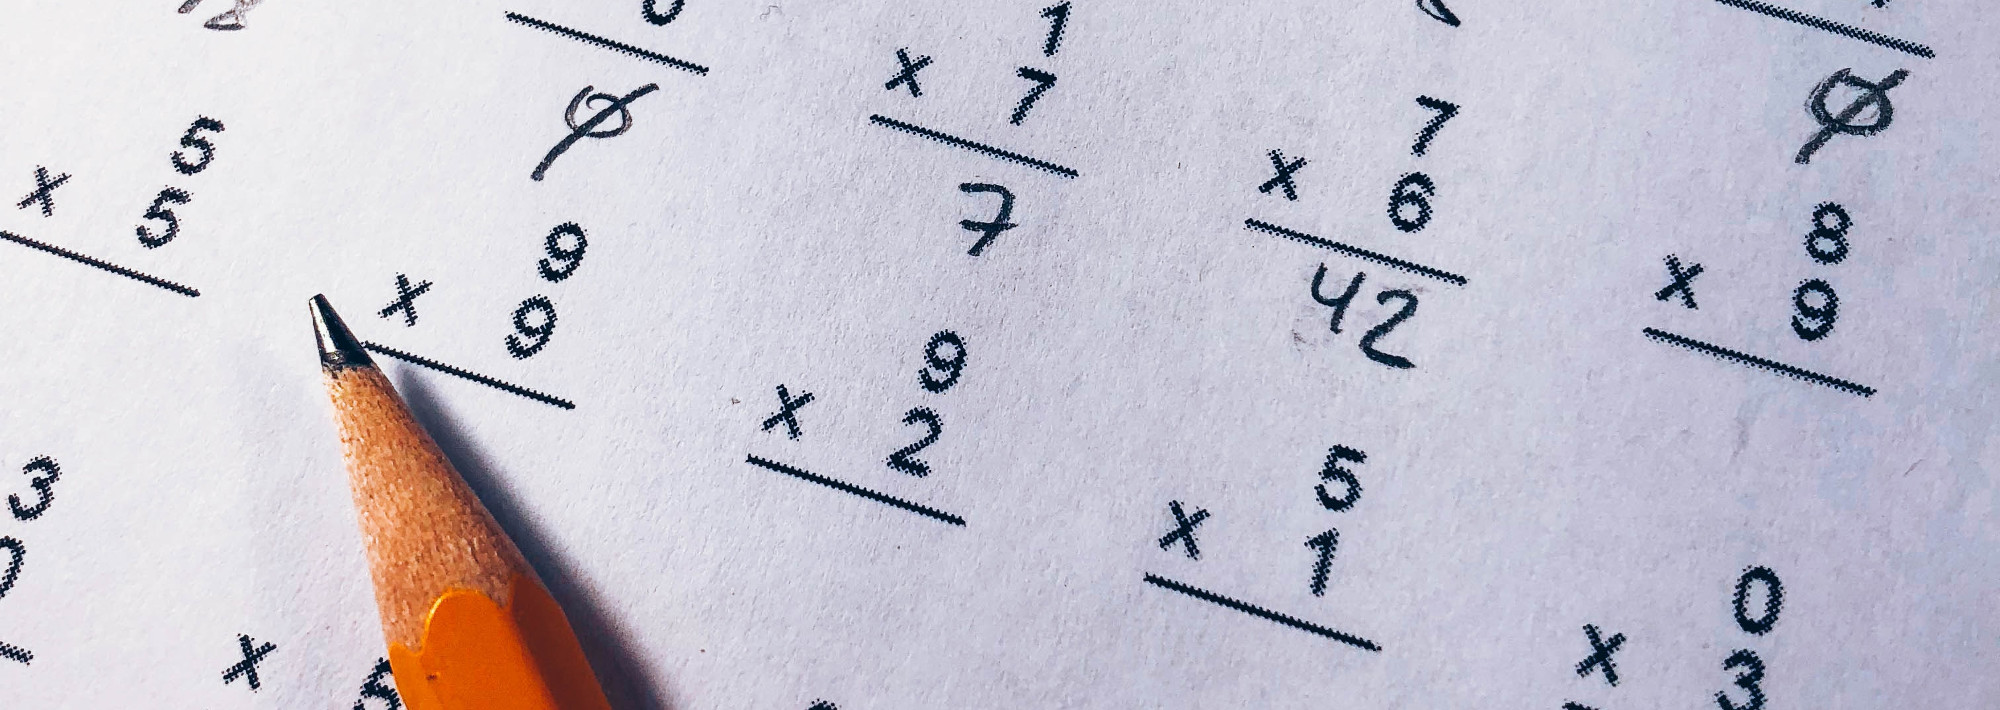 A piece of paper with single-digit multiplication problems and a pencil.